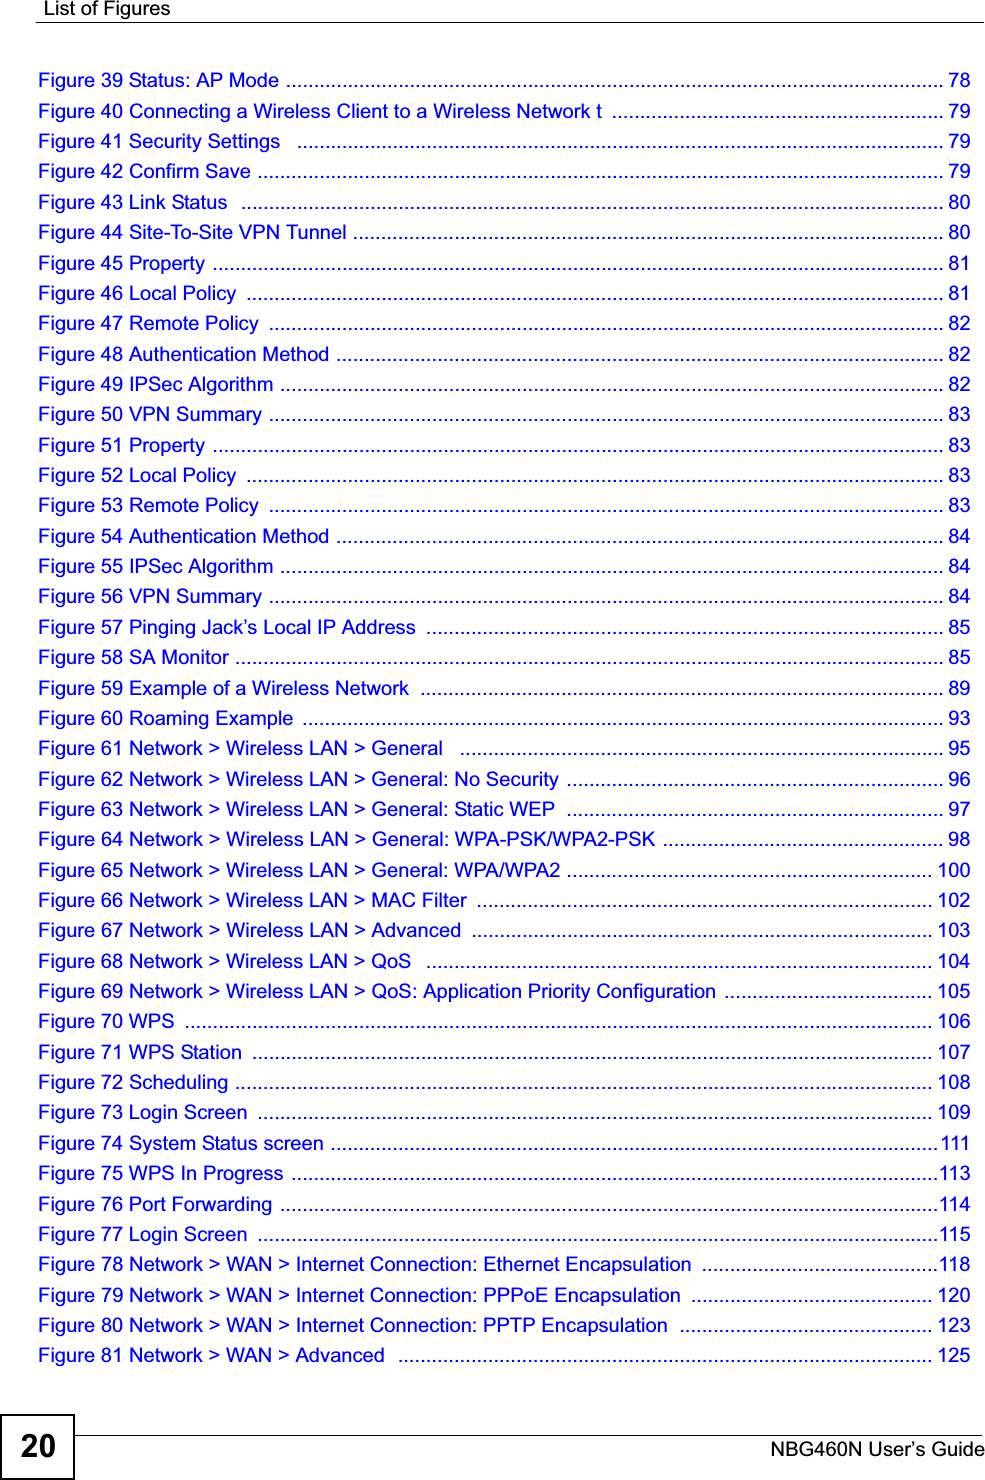 List of FiguresNBG460N User’s Guide20Figure 39 Status: AP Mode ..................................................................................................................... 78Figure 40 Connecting a Wireless Client to a Wireless Network t  ........................................................... 79Figure 41 Security Settings   ................................................................................................................... 79Figure 42 Confirm Save .......................................................................................................................... 79Figure 43 Link Status  ............................................................................................................................. 80Figure 44 Site-To-Site VPN Tunnel ......................................................................................................... 80Figure 45 Property .................................................................................................................................. 81Figure 46 Local Policy  ............................................................................................................................ 81Figure 47 Remote Policy  ........................................................................................................................ 82Figure 48 Authentication Method ............................................................................................................ 82Figure 49 IPSec Algorithm ...................................................................................................................... 82Figure 50 VPN Summary ........................................................................................................................ 83Figure 51 Property .................................................................................................................................. 83Figure 52 Local Policy  ............................................................................................................................ 83Figure 53 Remote Policy  ........................................................................................................................ 83Figure 54 Authentication Method ............................................................................................................ 84Figure 55 IPSec Algorithm ...................................................................................................................... 84Figure 56 VPN Summary ........................................................................................................................ 84Figure 57 Pinging Jack’s Local IP Address  ............................................................................................ 85Figure 58 SA Monitor .............................................................................................................................. 85Figure 59 Example of a Wireless Network  ............................................................................................. 89Figure 60 Roaming Example  .................................................................................................................. 93Figure 61 Network &gt; Wireless LAN &gt; General   ...................................................................................... 95Figure 62 Network &gt; Wireless LAN &gt; General: No Security ................................................................... 96Figure 63 Network &gt; Wireless LAN &gt; General: Static WEP  ................................................................... 97Figure 64 Network &gt; Wireless LAN &gt; General: WPA-PSK/WPA2-PSK .................................................. 98Figure 65 Network &gt; Wireless LAN &gt; General: WPA/WPA2 ................................................................. 100Figure 66 Network &gt; Wireless LAN &gt; MAC Filter  ................................................................................. 102Figure 67 Network &gt; Wireless LAN &gt; Advanced  .................................................................................. 103Figure 68 Network &gt; Wireless LAN &gt; QoS   .......................................................................................... 104Figure 69 Network &gt; Wireless LAN &gt; QoS: Application Priority Configuration  ..................................... 105Figure 70 WPS  ..................................................................................................................................... 106Figure 71 WPS Station  ......................................................................................................................... 107Figure 72 Scheduling ............................................................................................................................ 108Figure 73 Login Screen  ........................................................................................................................ 109Figure 74 System Status screen ............................................................................................................111Figure 75 WPS In Progress ...................................................................................................................113Figure 76 Port Forwarding .....................................................................................................................114Figure 77 Login Screen  .........................................................................................................................115Figure 78 Network &gt; WAN &gt; Internet Connection: Ethernet Encapsulation  ..........................................118Figure 79 Network &gt; WAN &gt; Internet Connection: PPPoE Encapsulation ........................................... 120Figure 80 Network &gt; WAN &gt; Internet Connection: PPTP Encapsulation  ............................................. 123Figure 81 Network &gt; WAN &gt; Advanced  ............................................................................................... 125